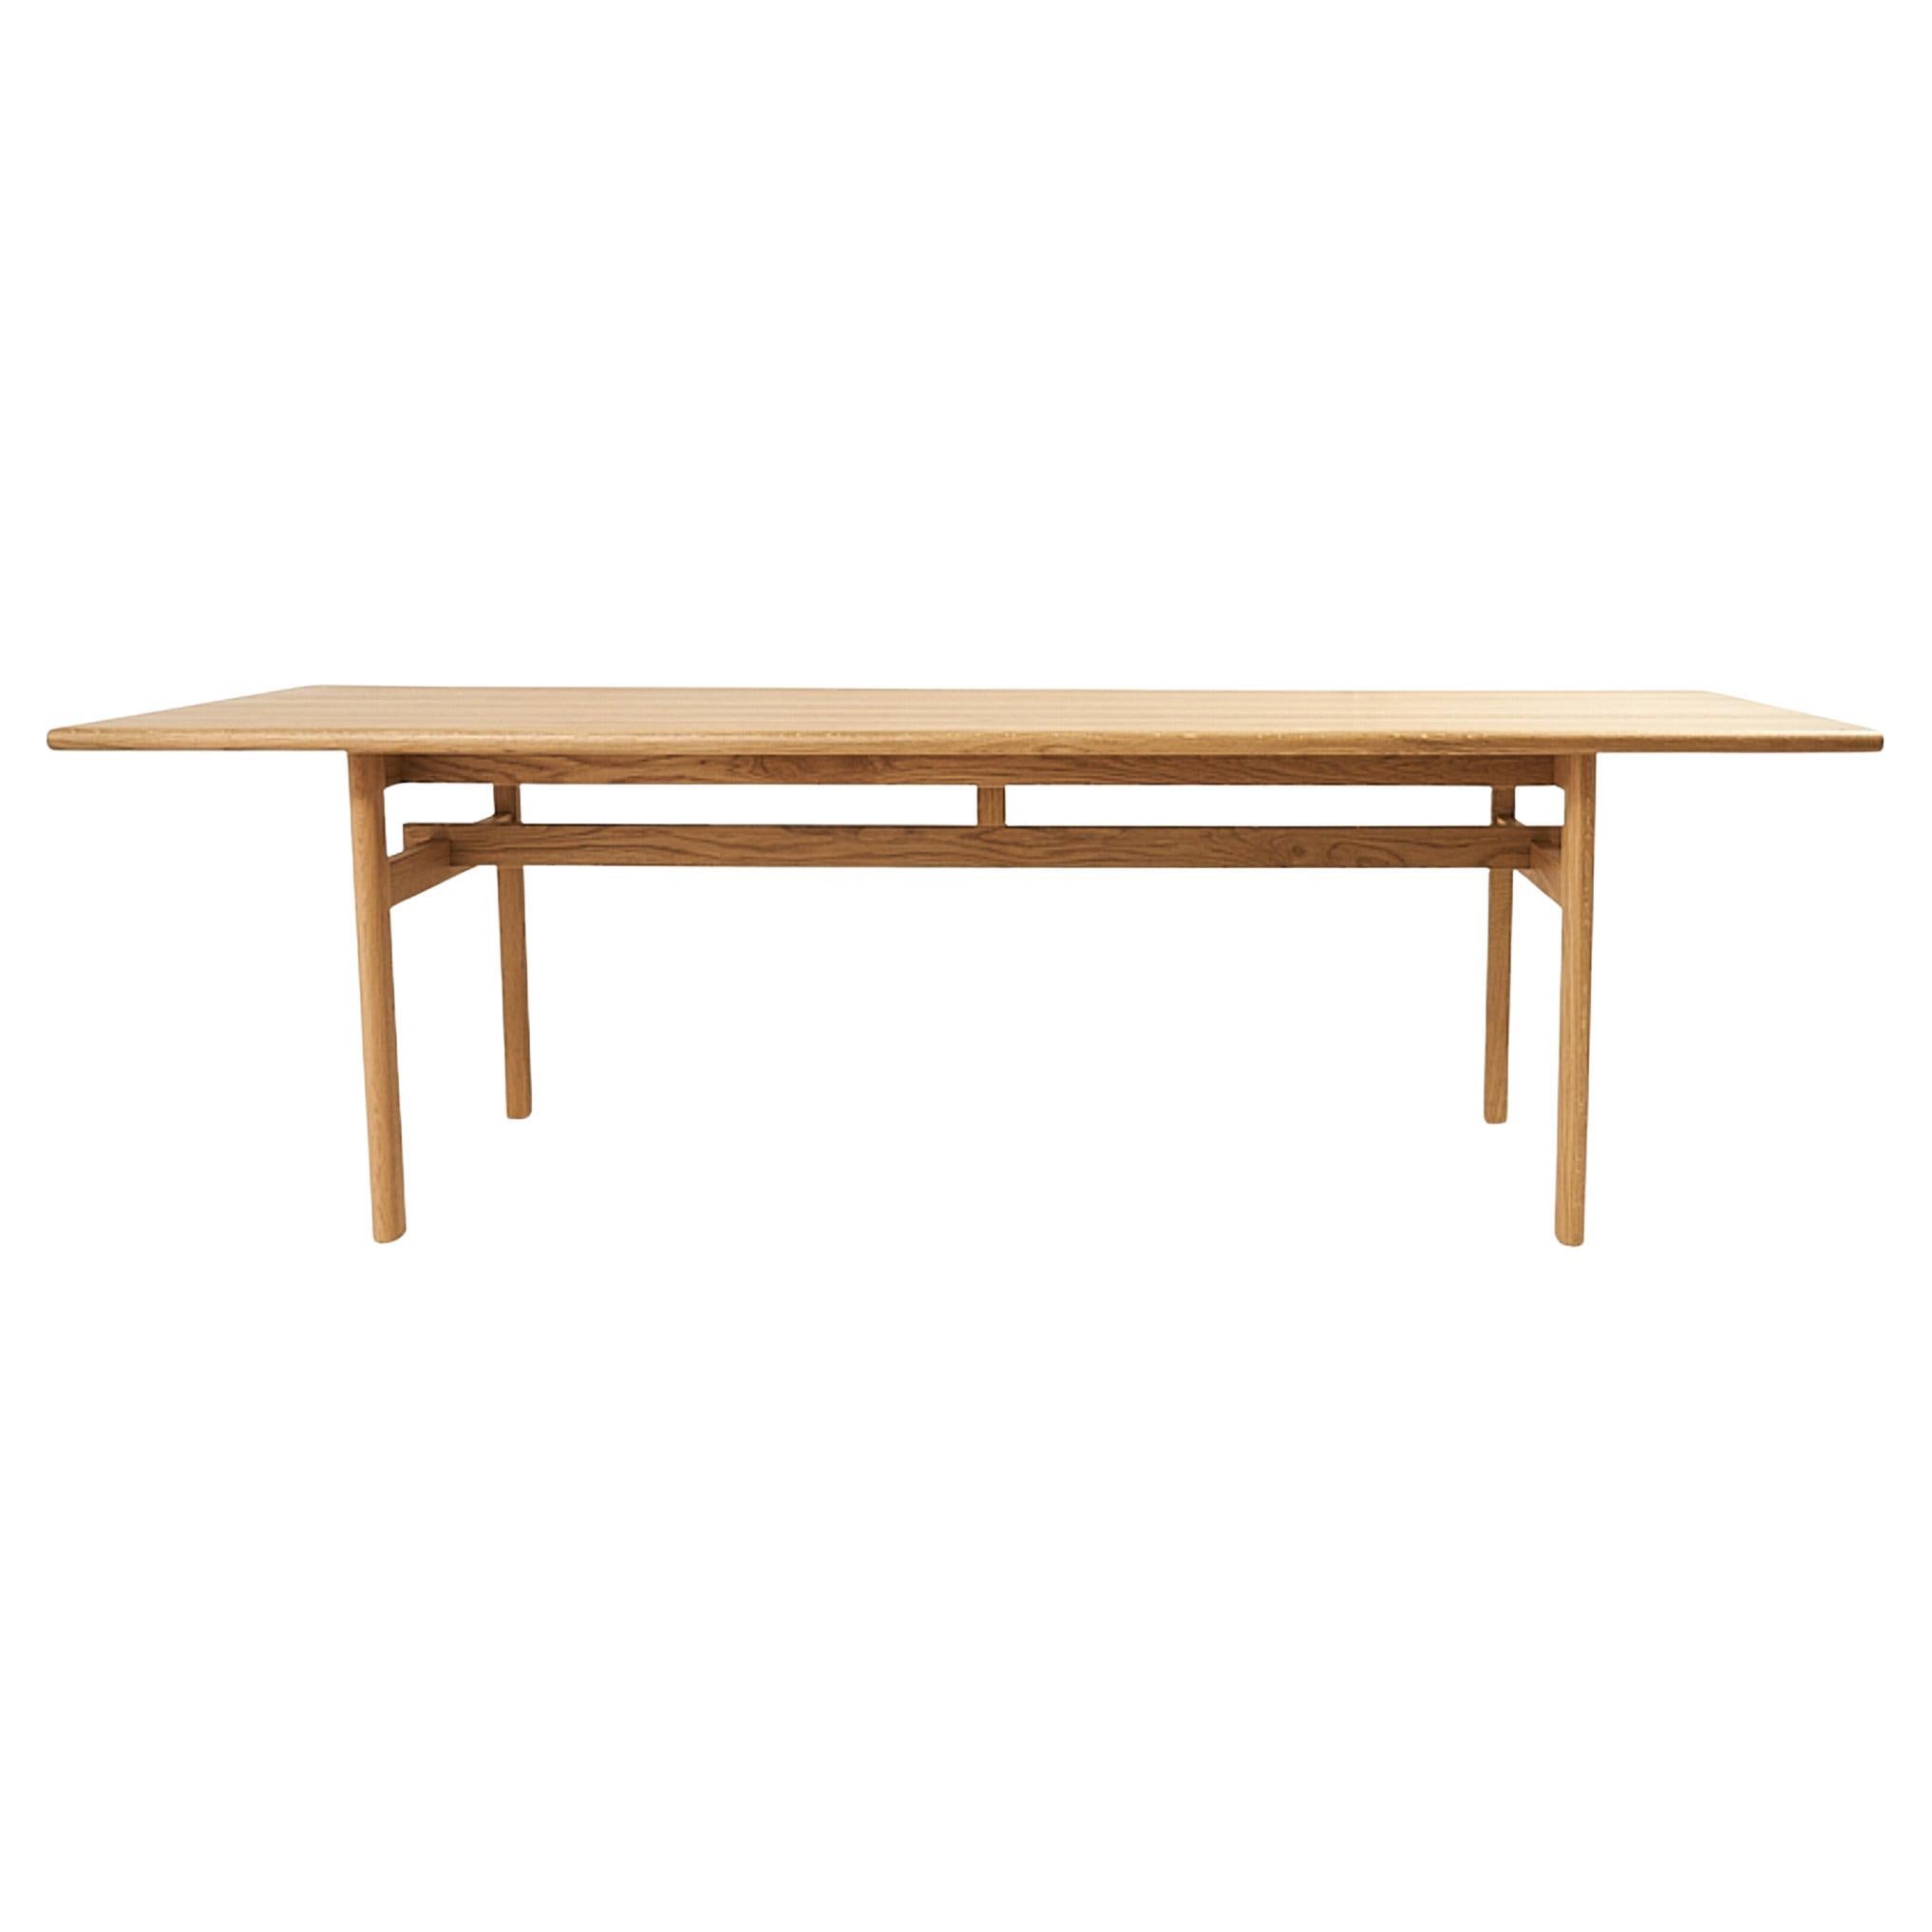 Schumacher Editions Mokki 94.5" Dining Table in Natural Matte